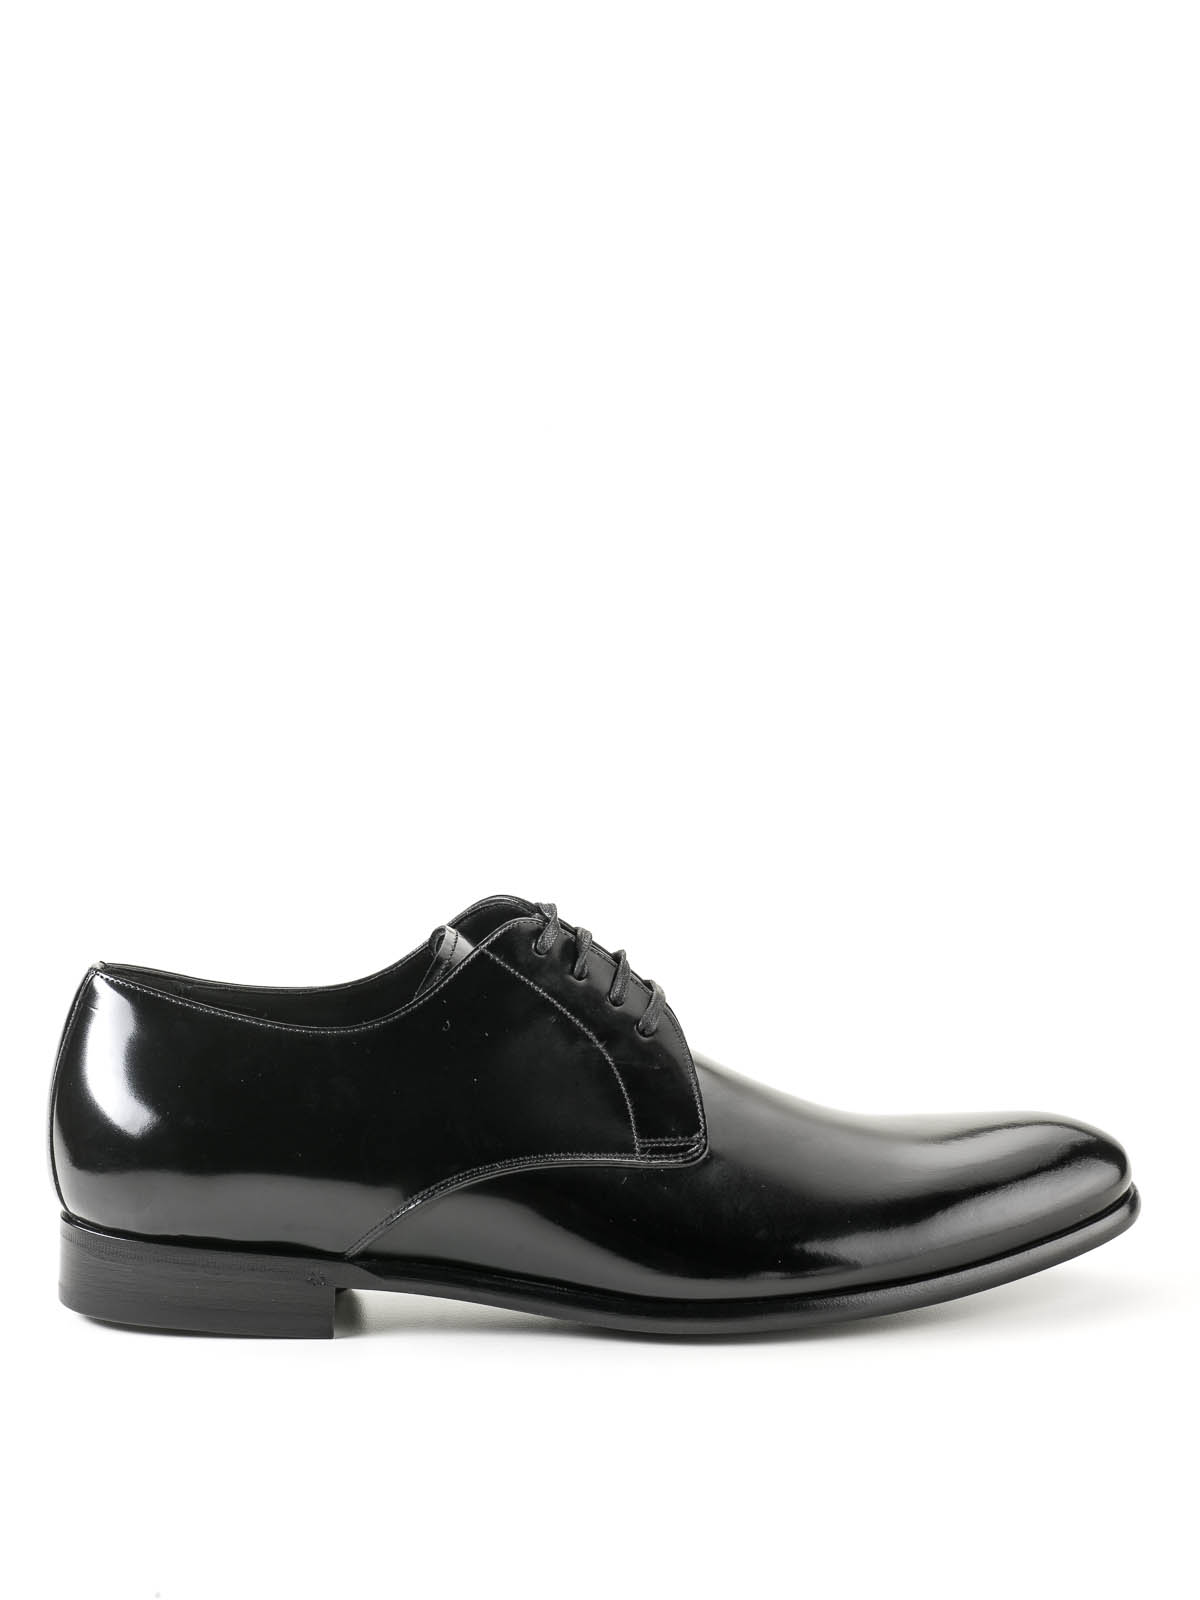 Classic shoes Dolce & Gabbana - Derby shoes - CA5753A120380999 